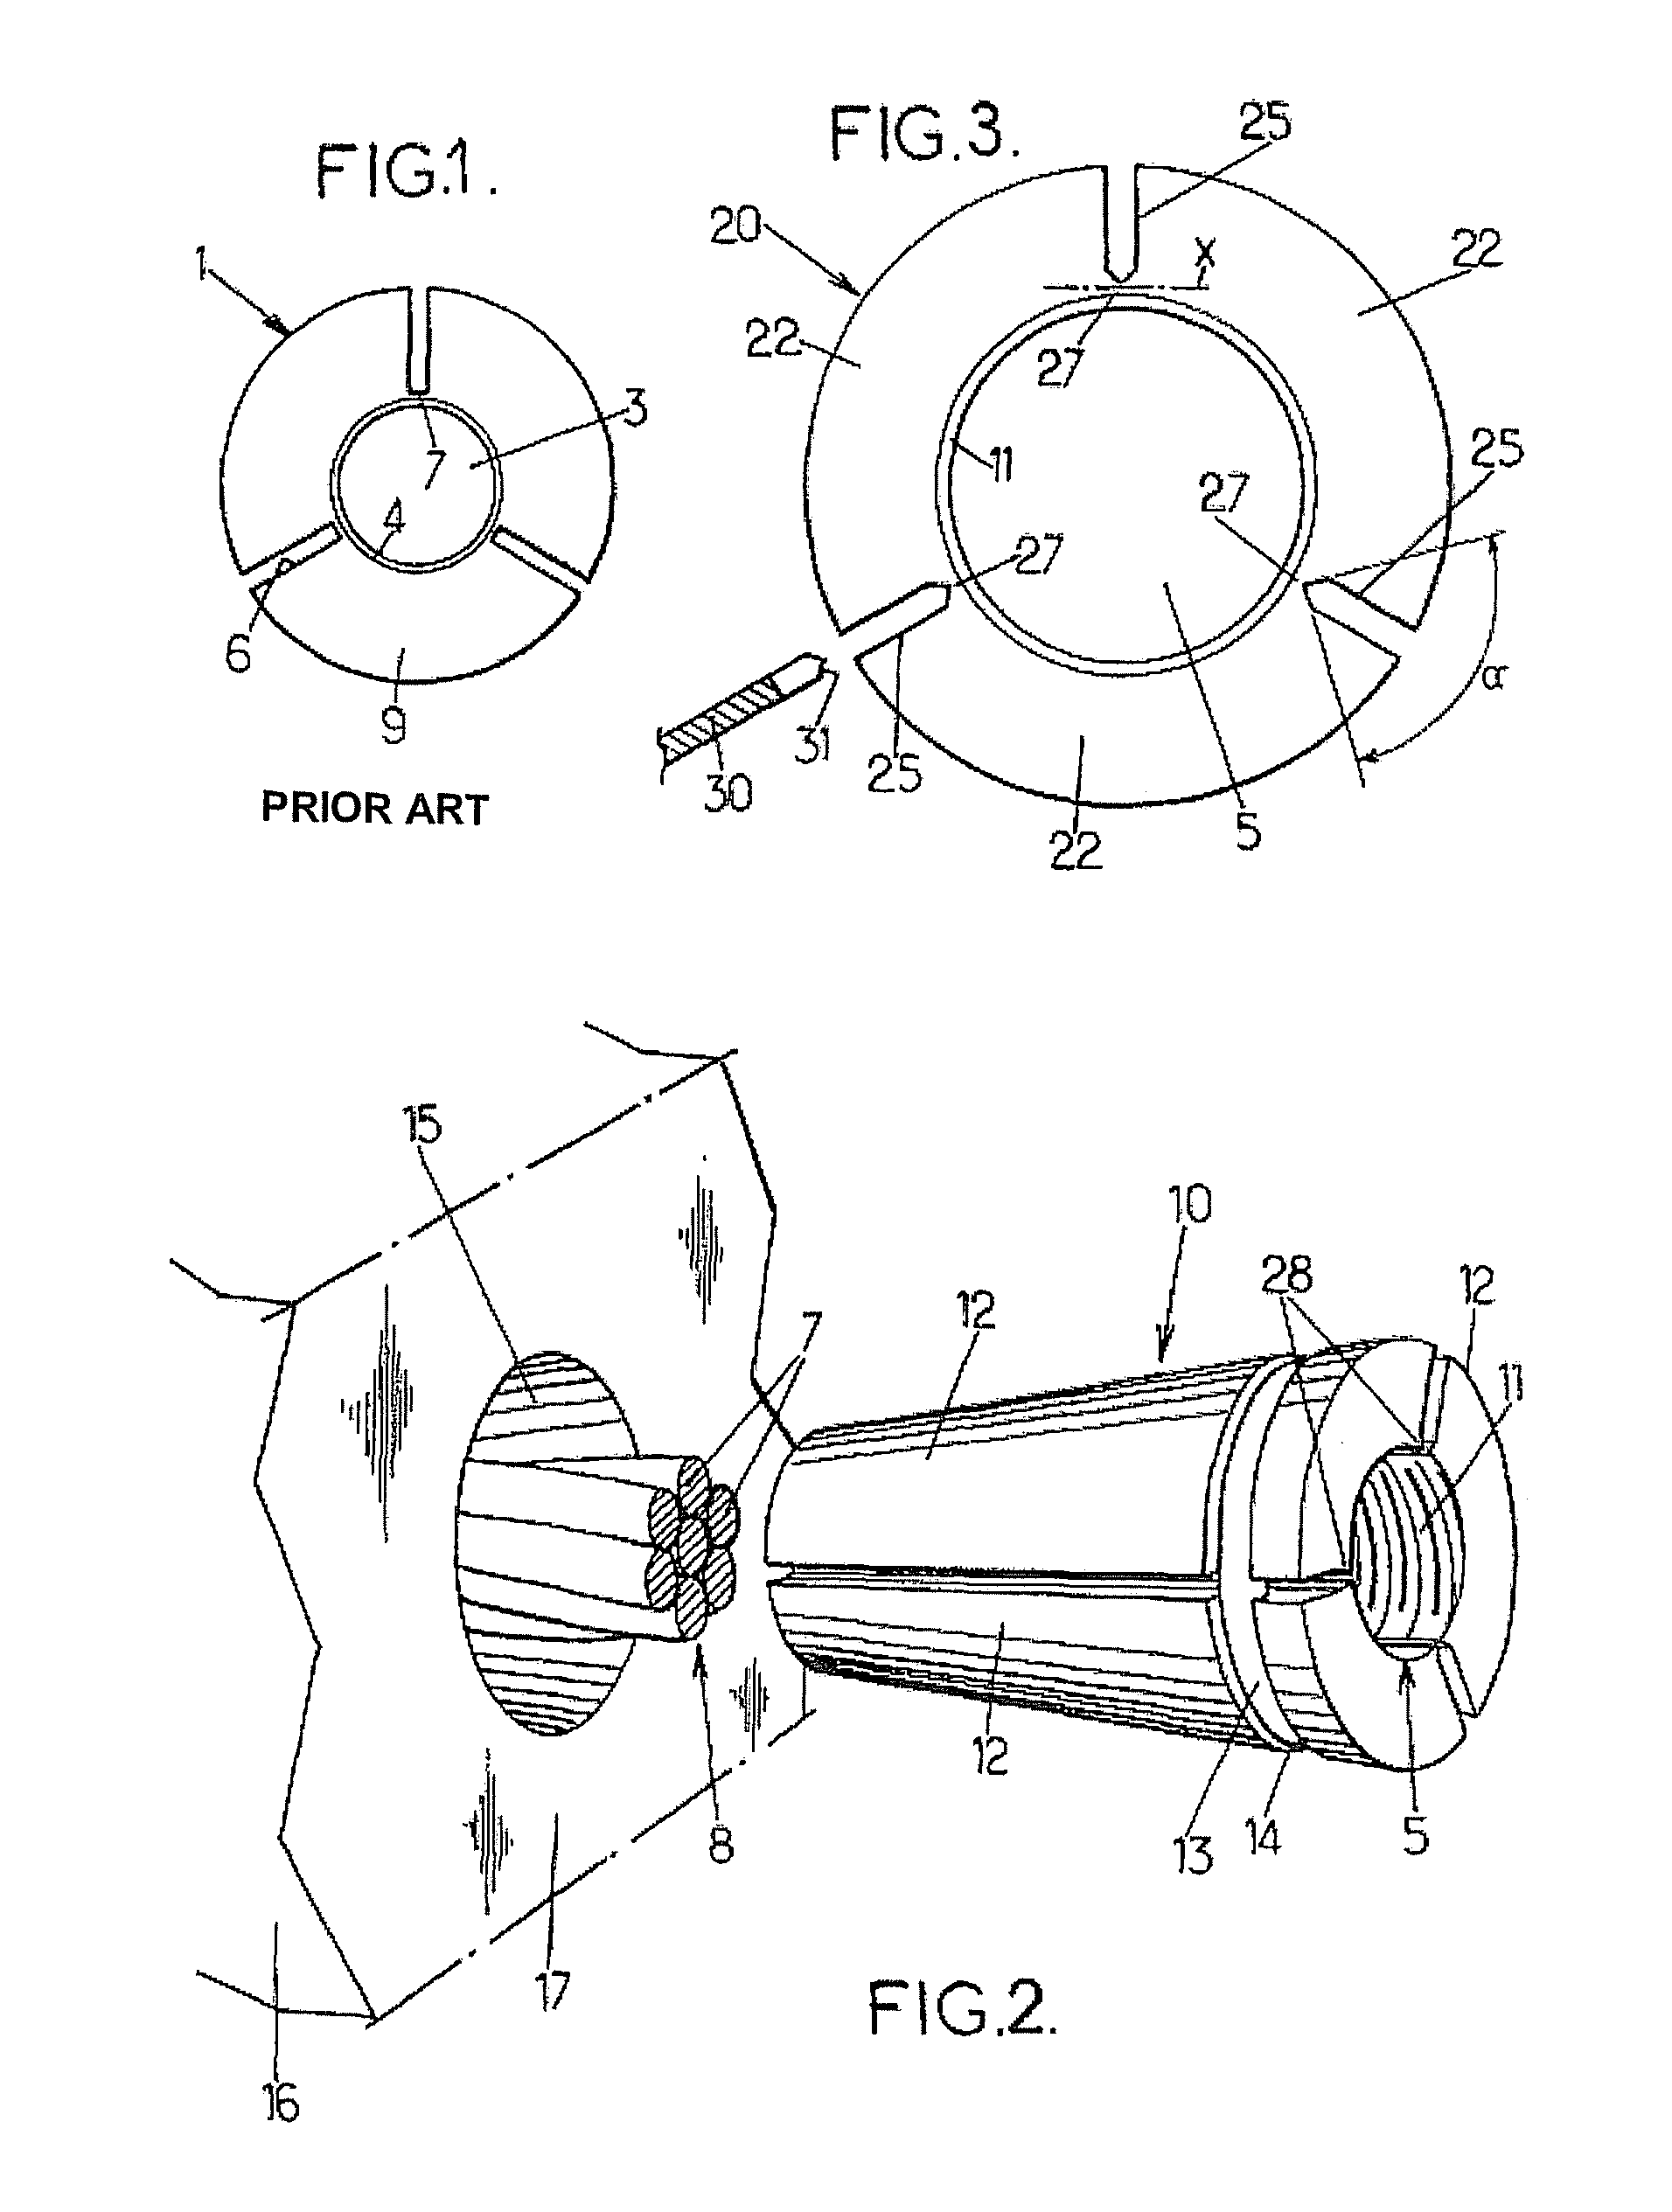 Single-piece part for making a cable anchoring jaw and method for making such a jaw